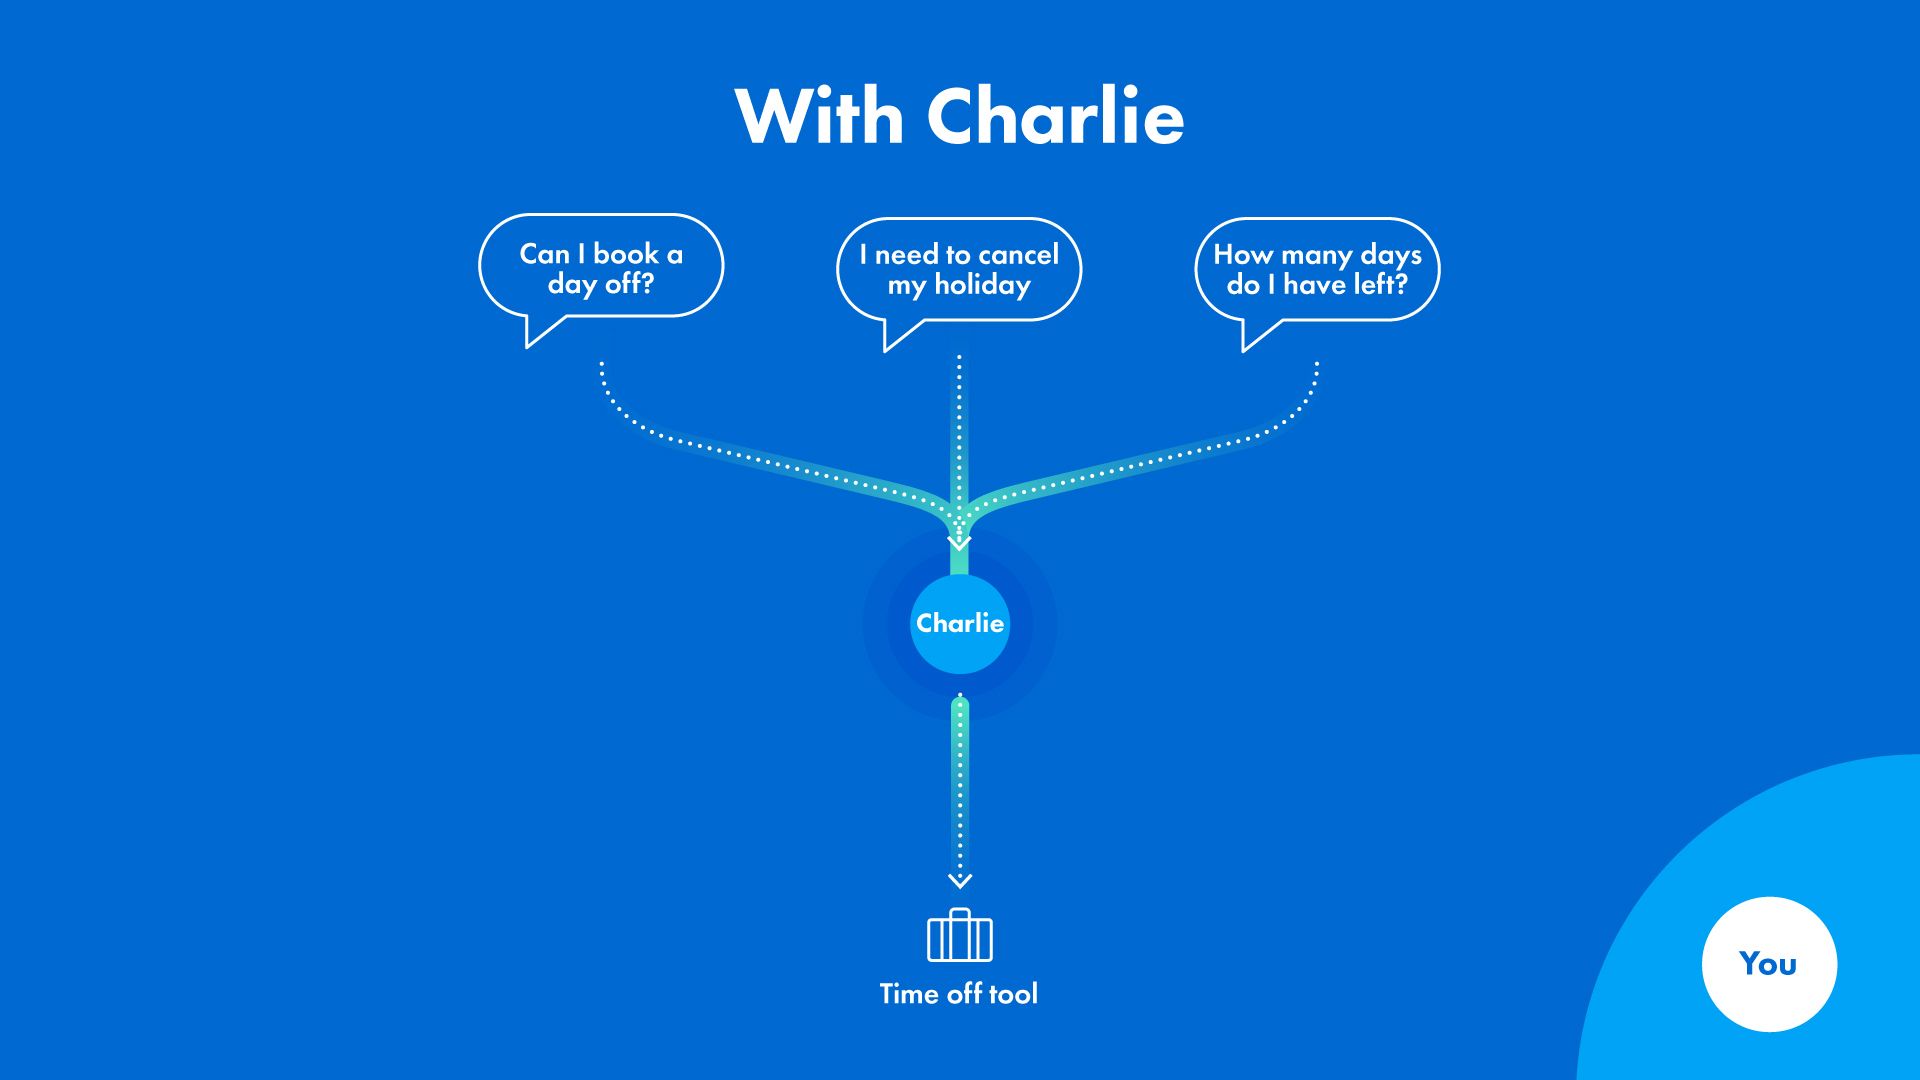 With Charlie, no bottleneck as the process runs smoothly by itself 